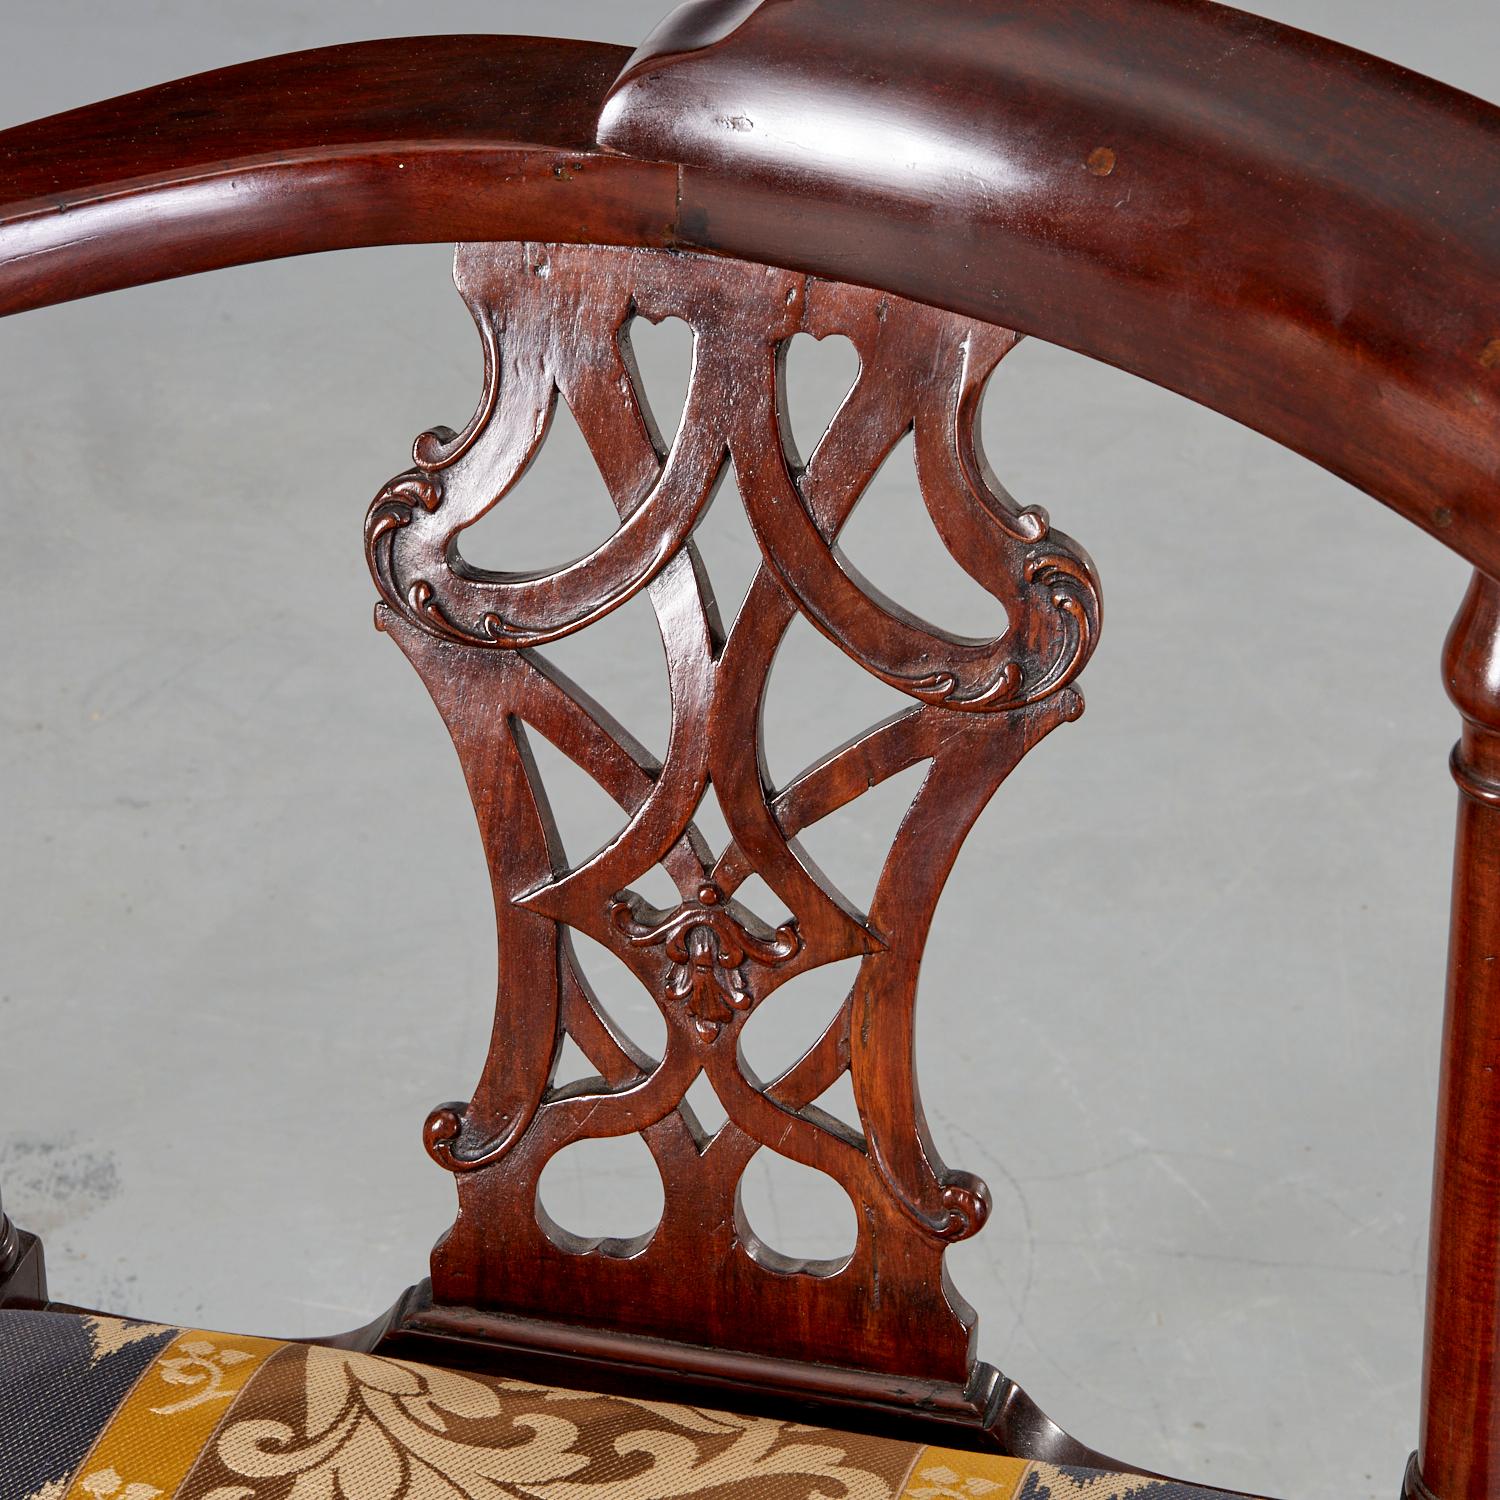 Late 18th/ Early 19th c., English George III carved mahogany corner chair with each side with pierced splats below a curved chair rail, the drop in seat above a X form stretcher joining square legs. The seat is upholstered in a yellow, gold and pale